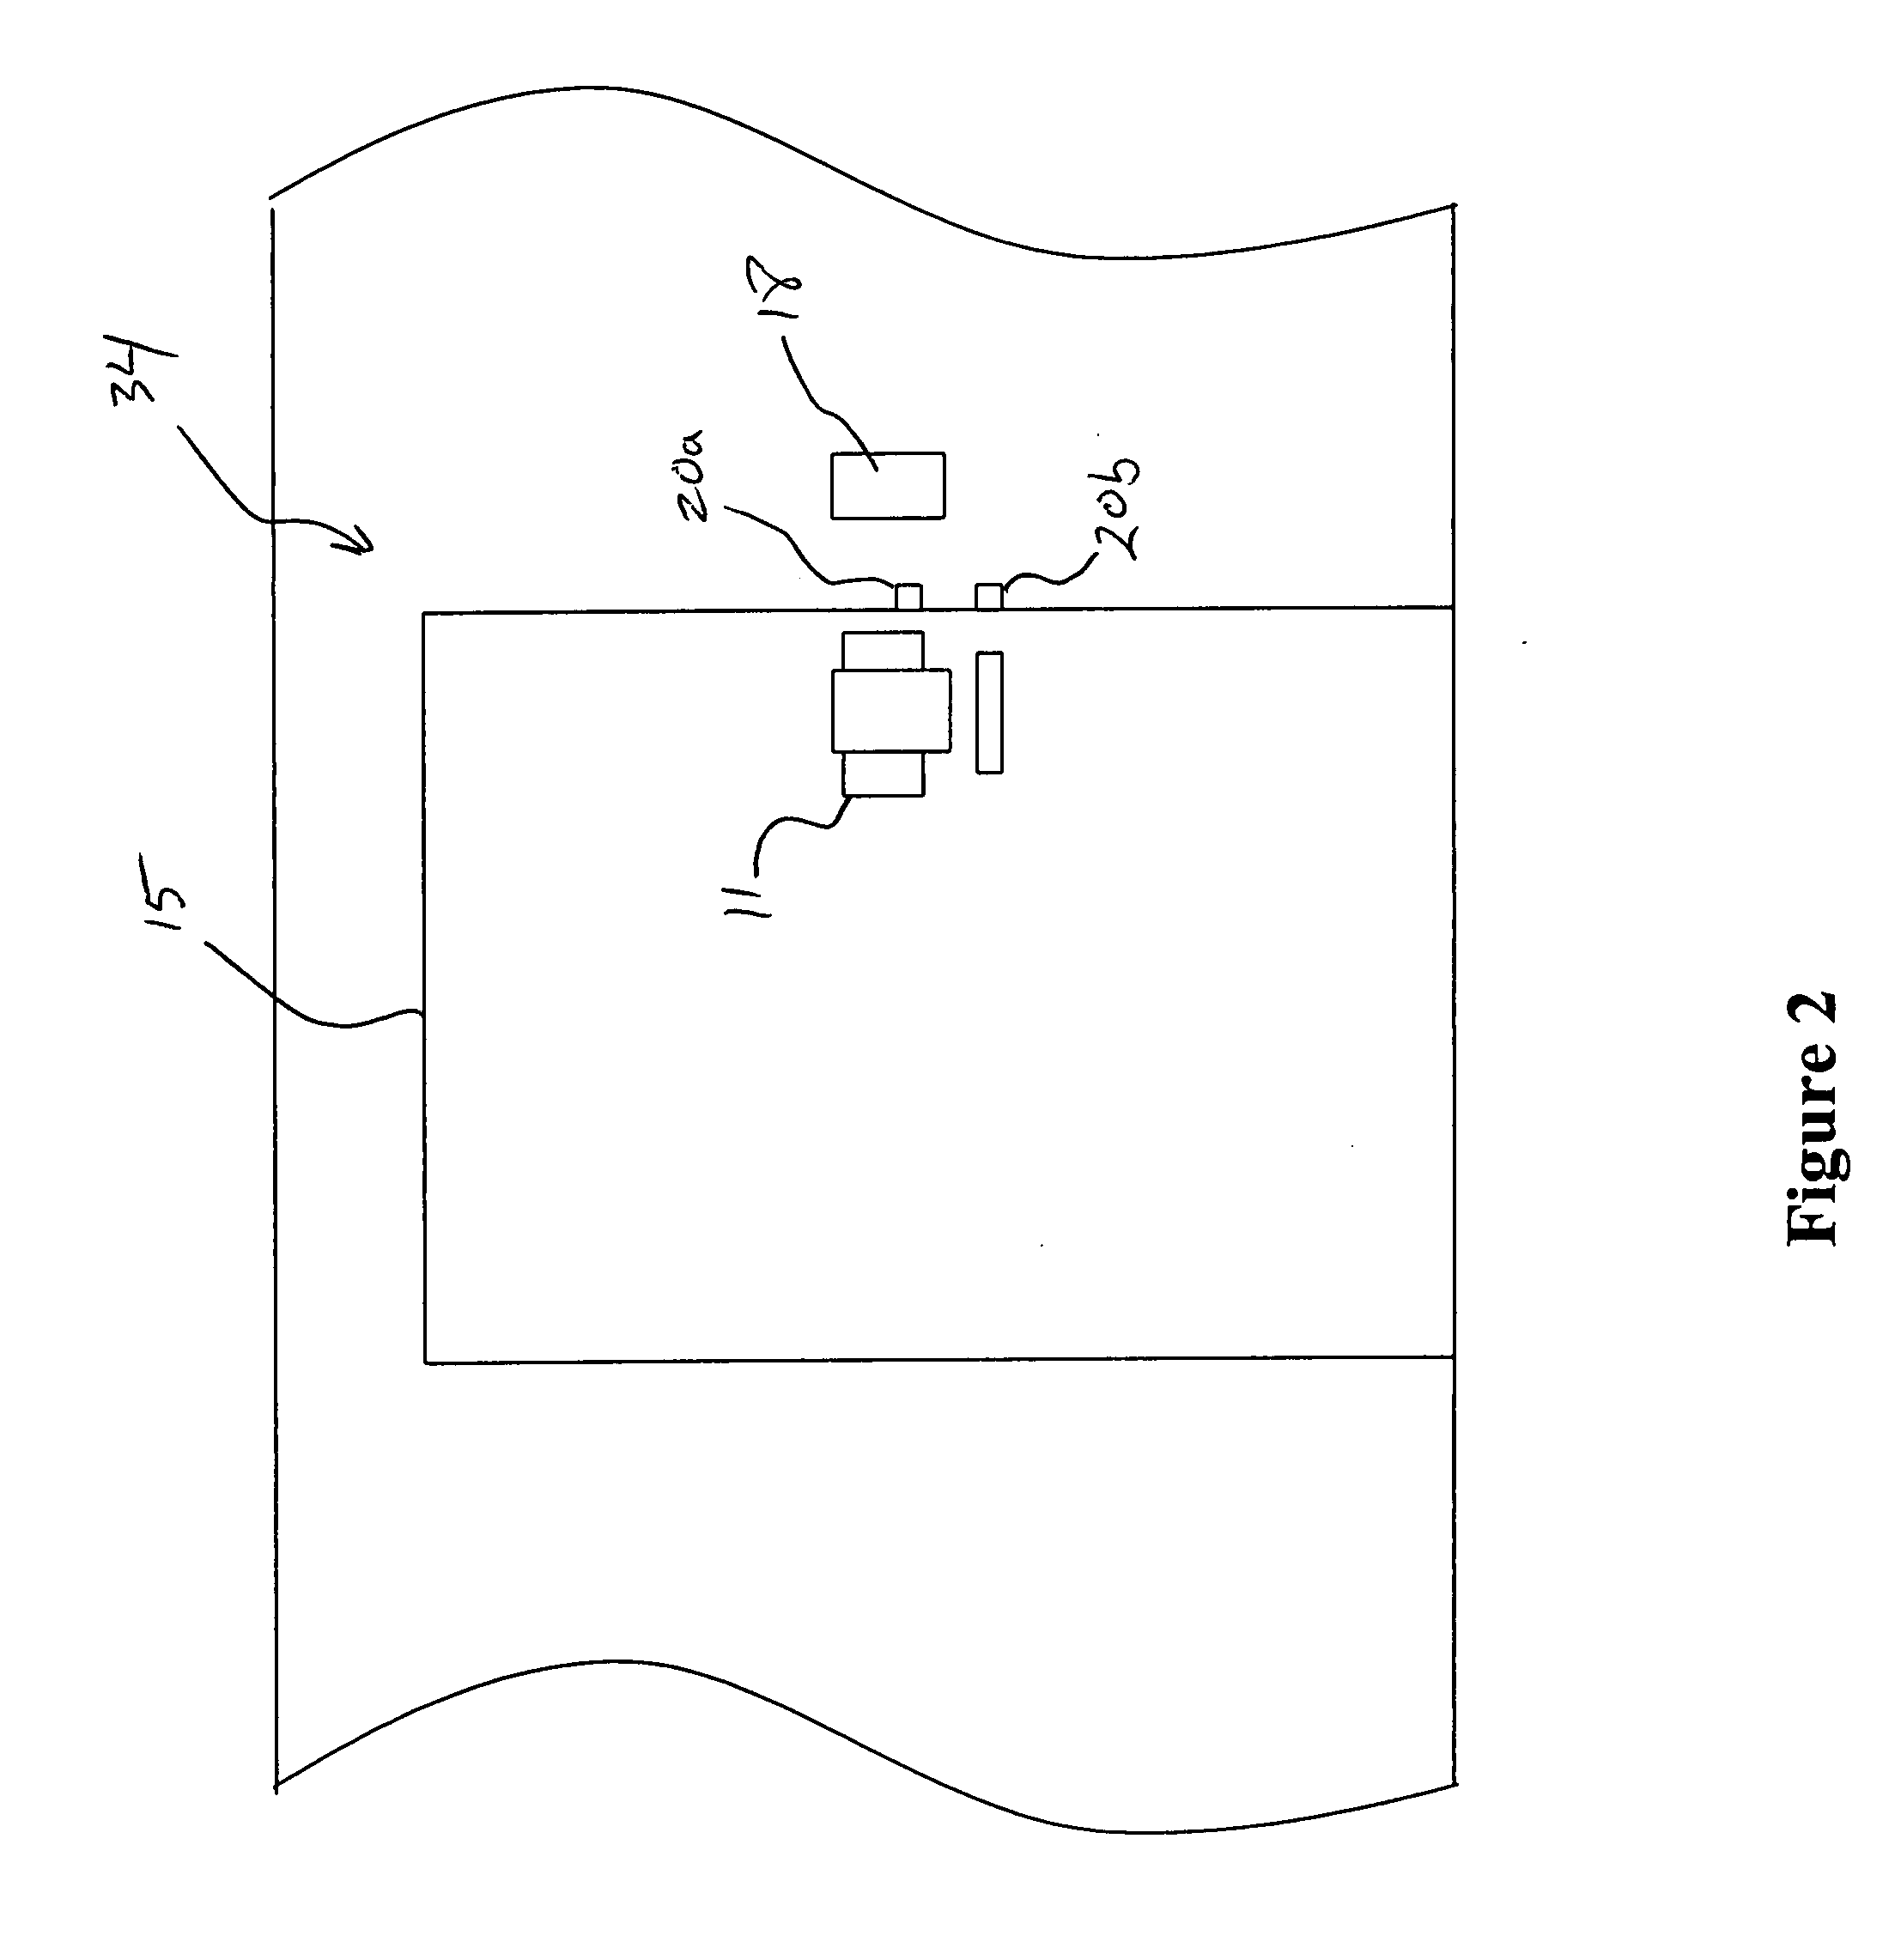 Power management lock system and method